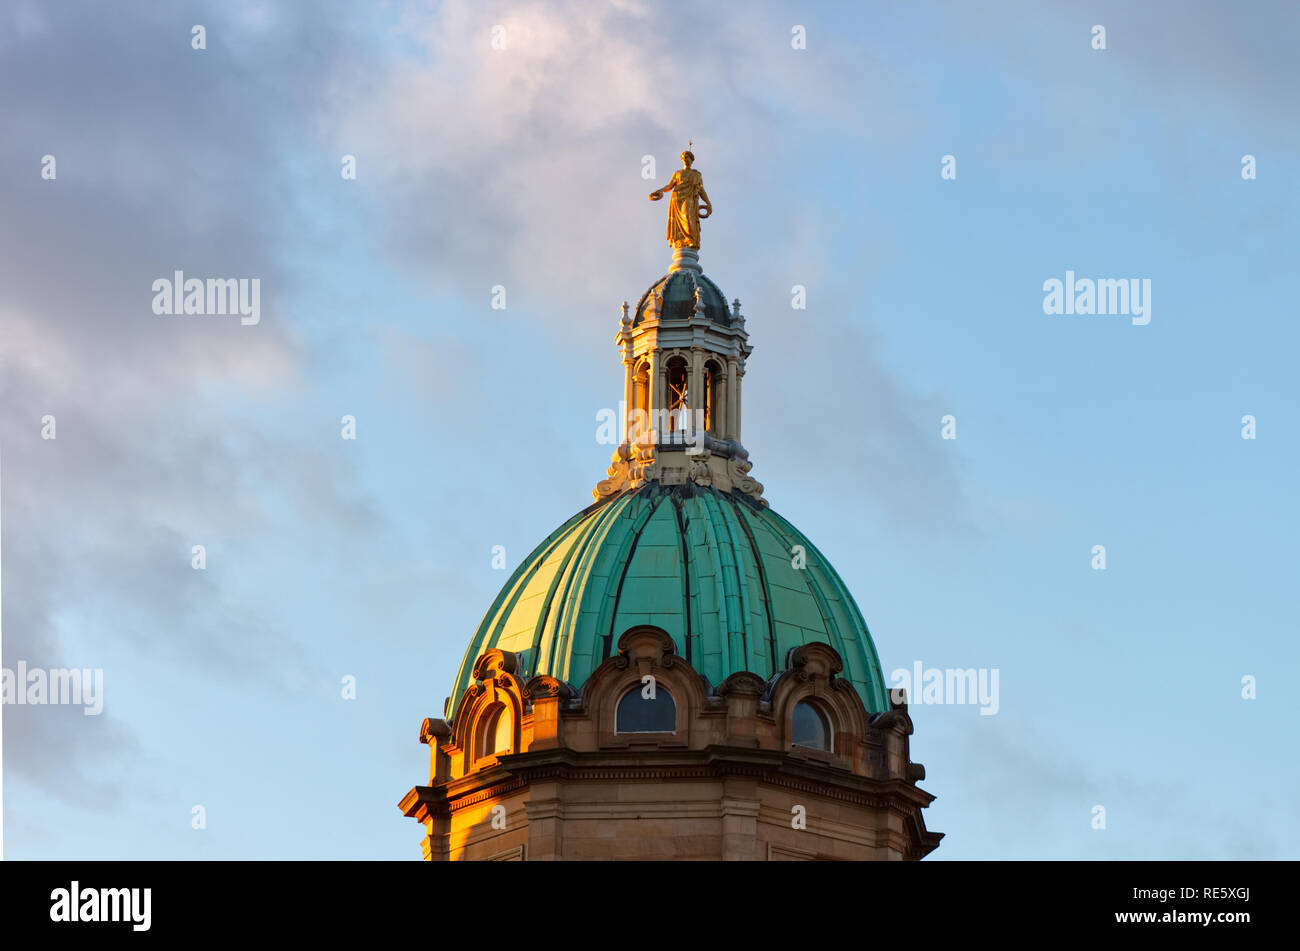 A statue of an angel sitting at the top of the dome of the Mound Museum in Edinburgh, Scotland, UK at sunset. Stock Photo